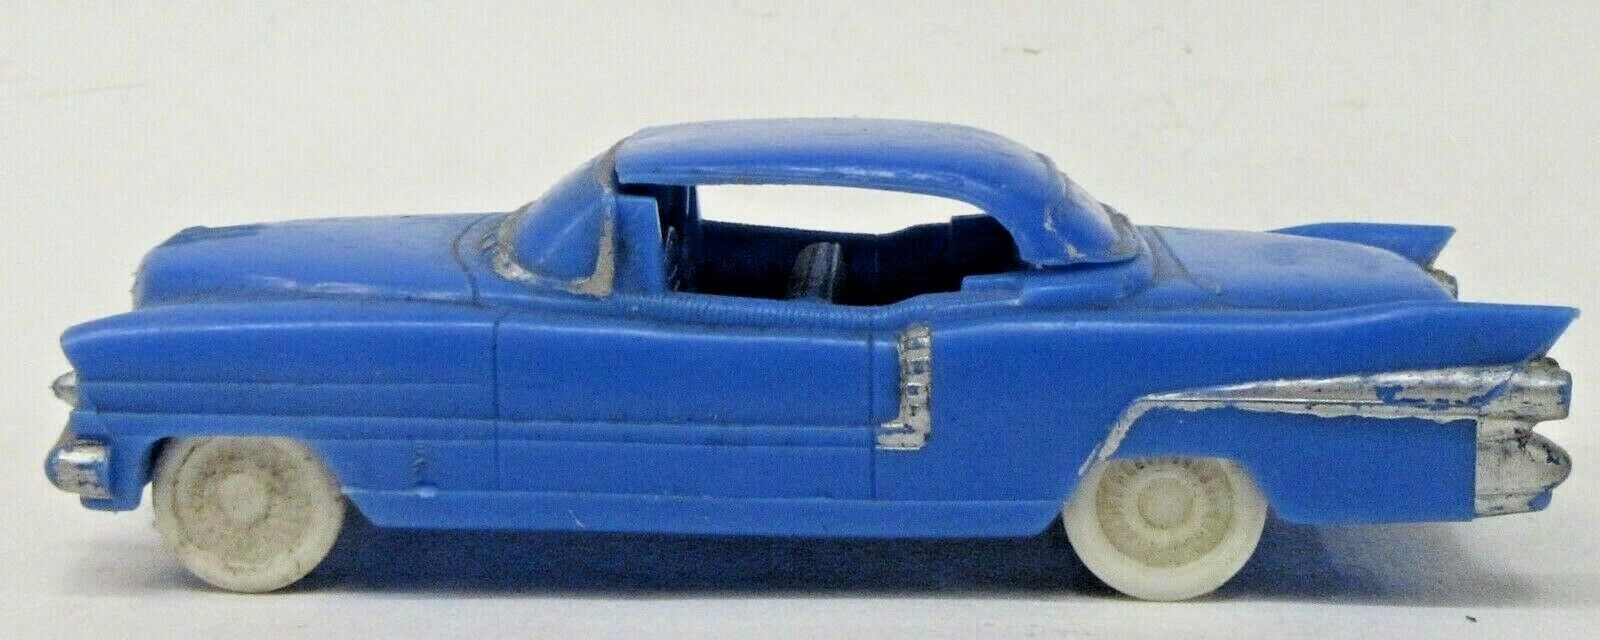 1950's Plasticville Cadillac Blue With Silver Trim White Wheels 3.75" R2